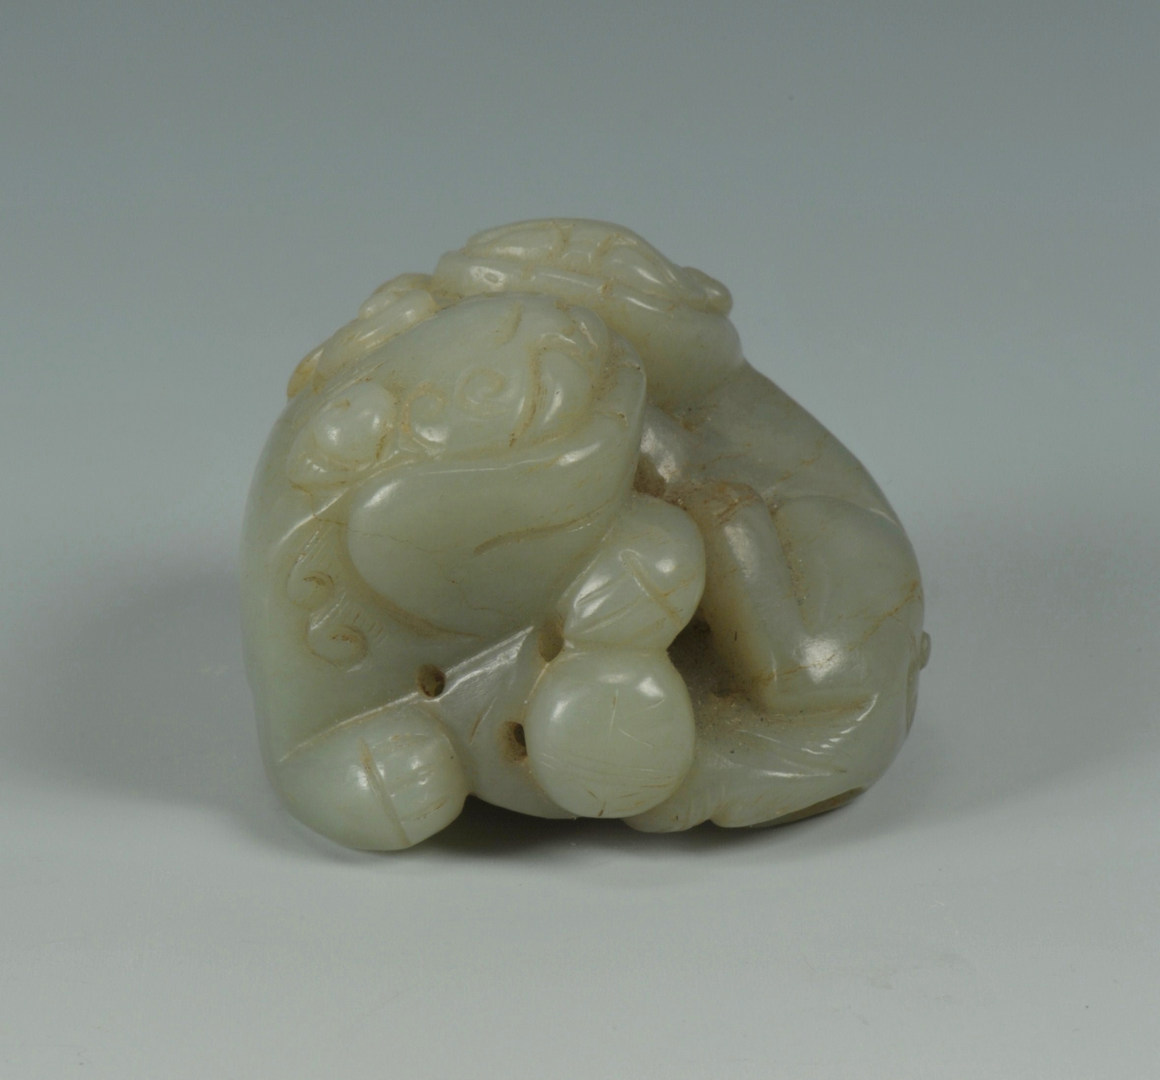 Lot 14: Chinese Jade Carving of Dogs